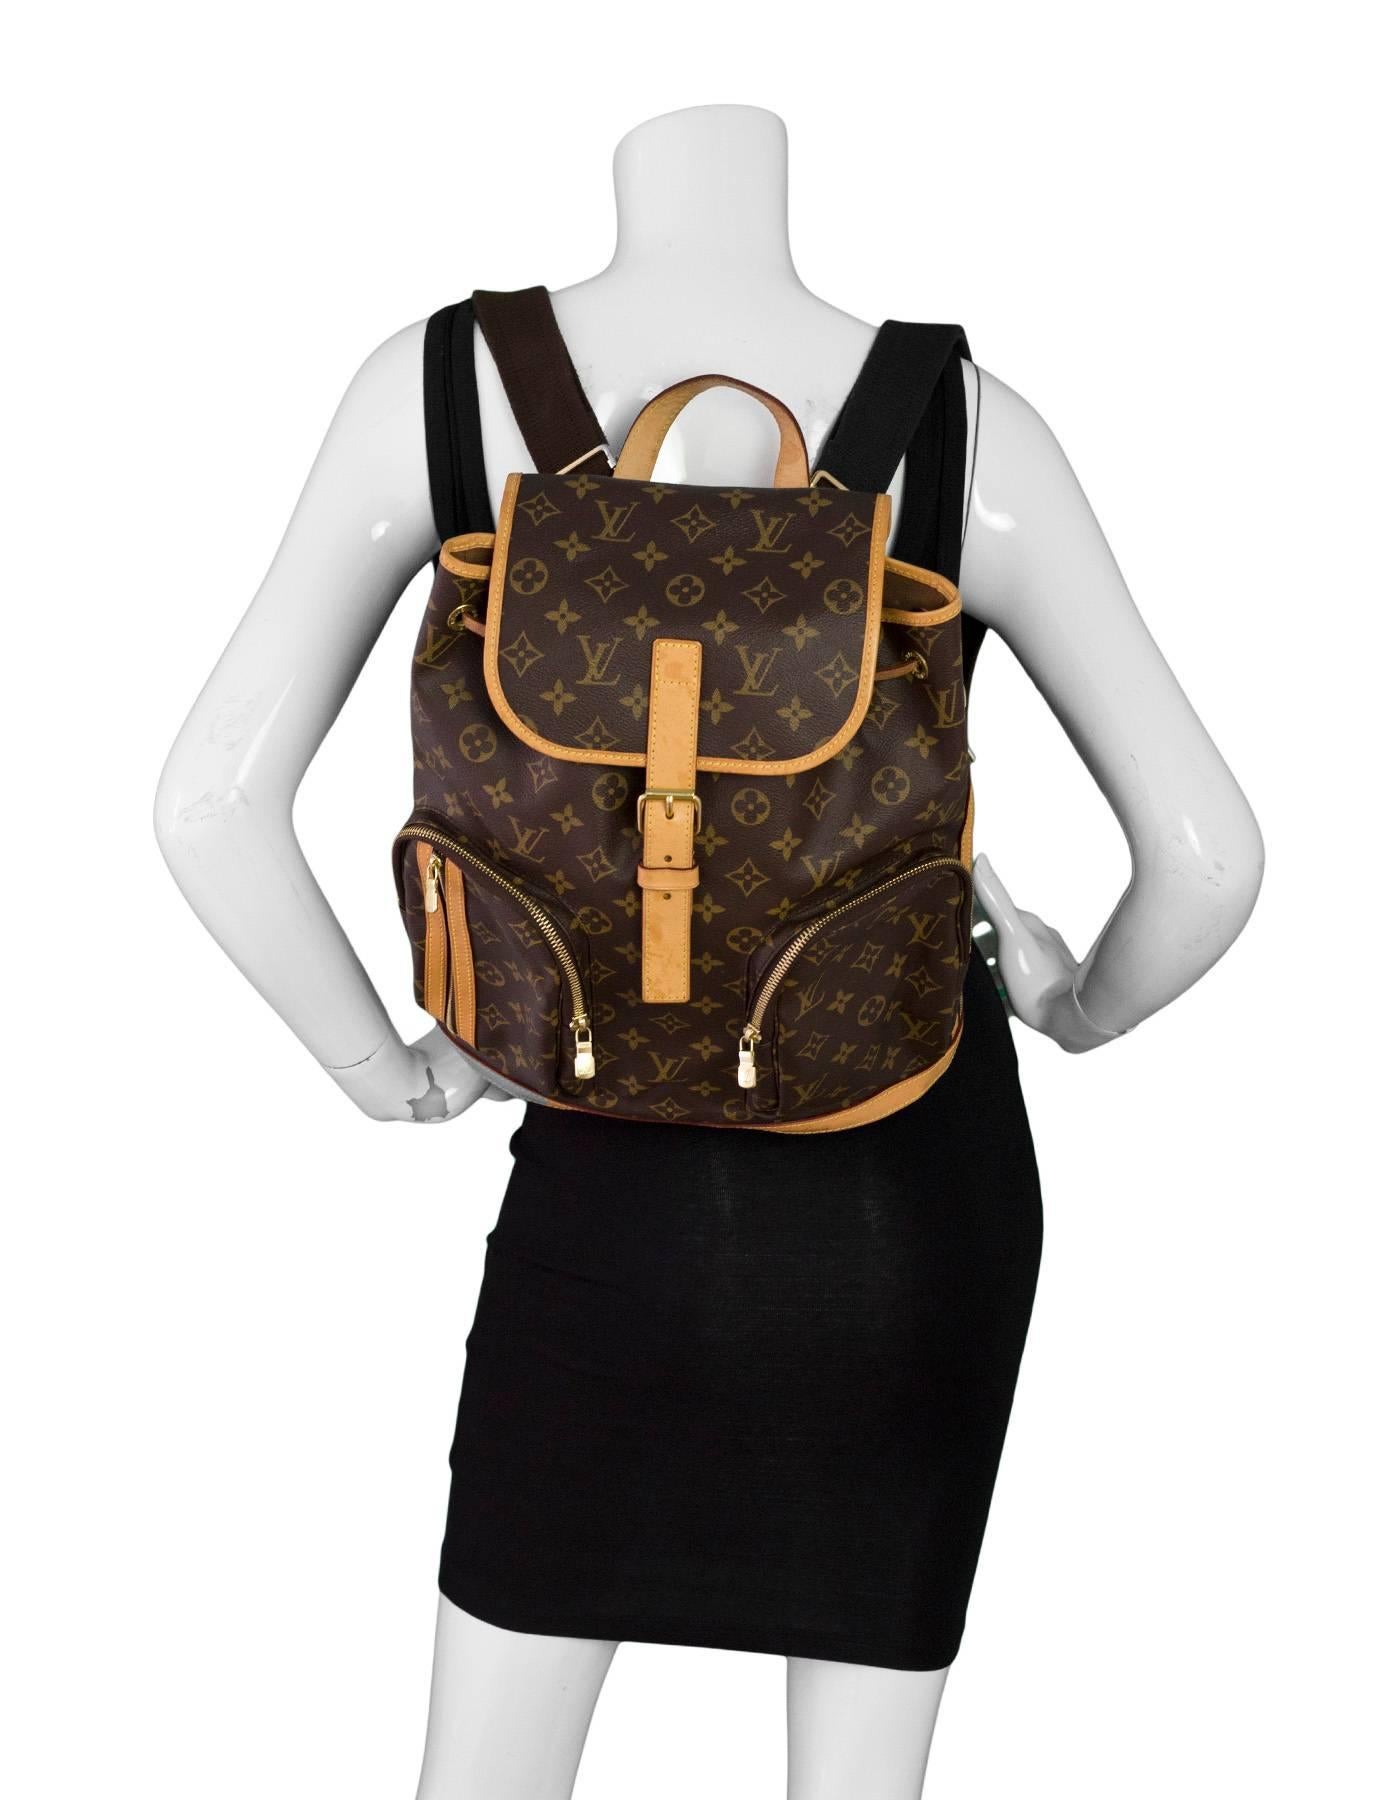 Louis Vuitton Monogram Bosphore Backpack

Made In: France
Year of Production: 2015
Color: Brown
Hardware: Goldtone
Materials: Coated canvas, vachetta leather
Lining: Brown canvas
Closure/Opening: Drawstring and flap top with buckle and notch